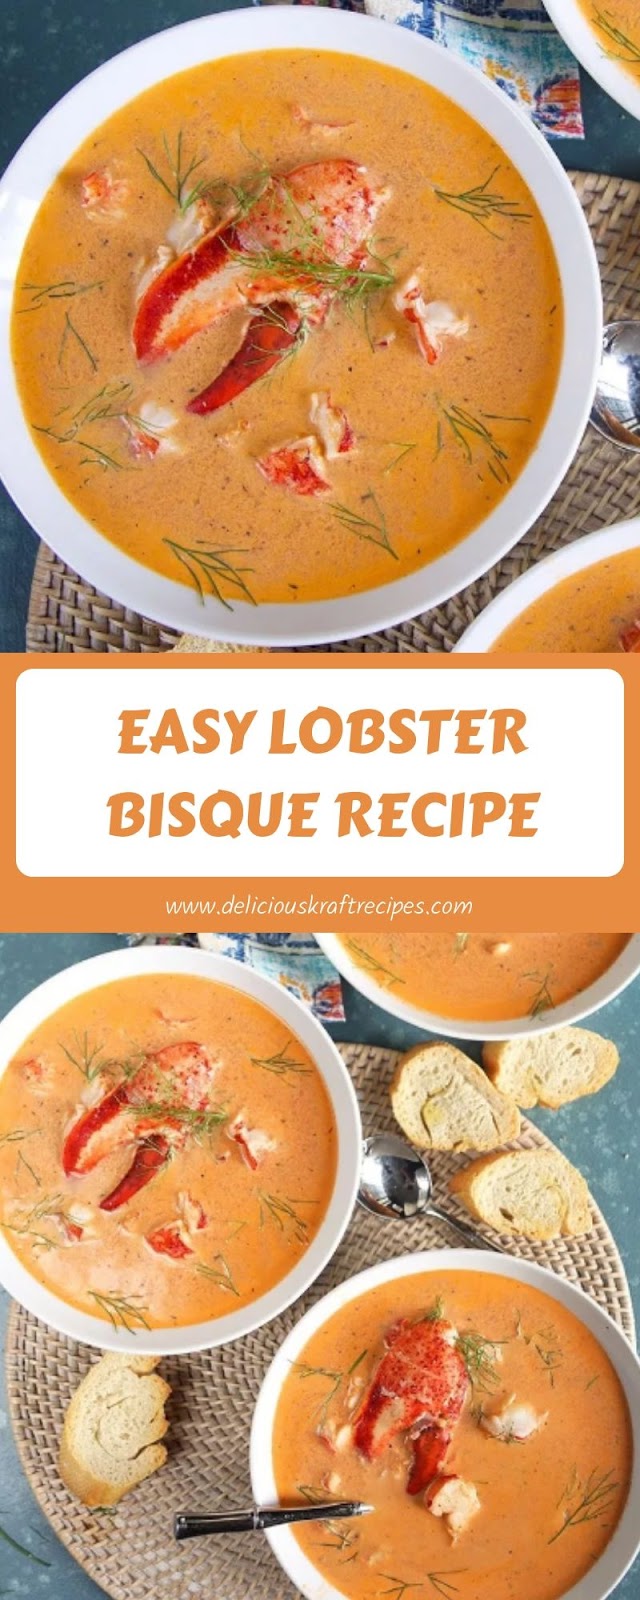 EASY LOBSTER BISQUE RECIPE